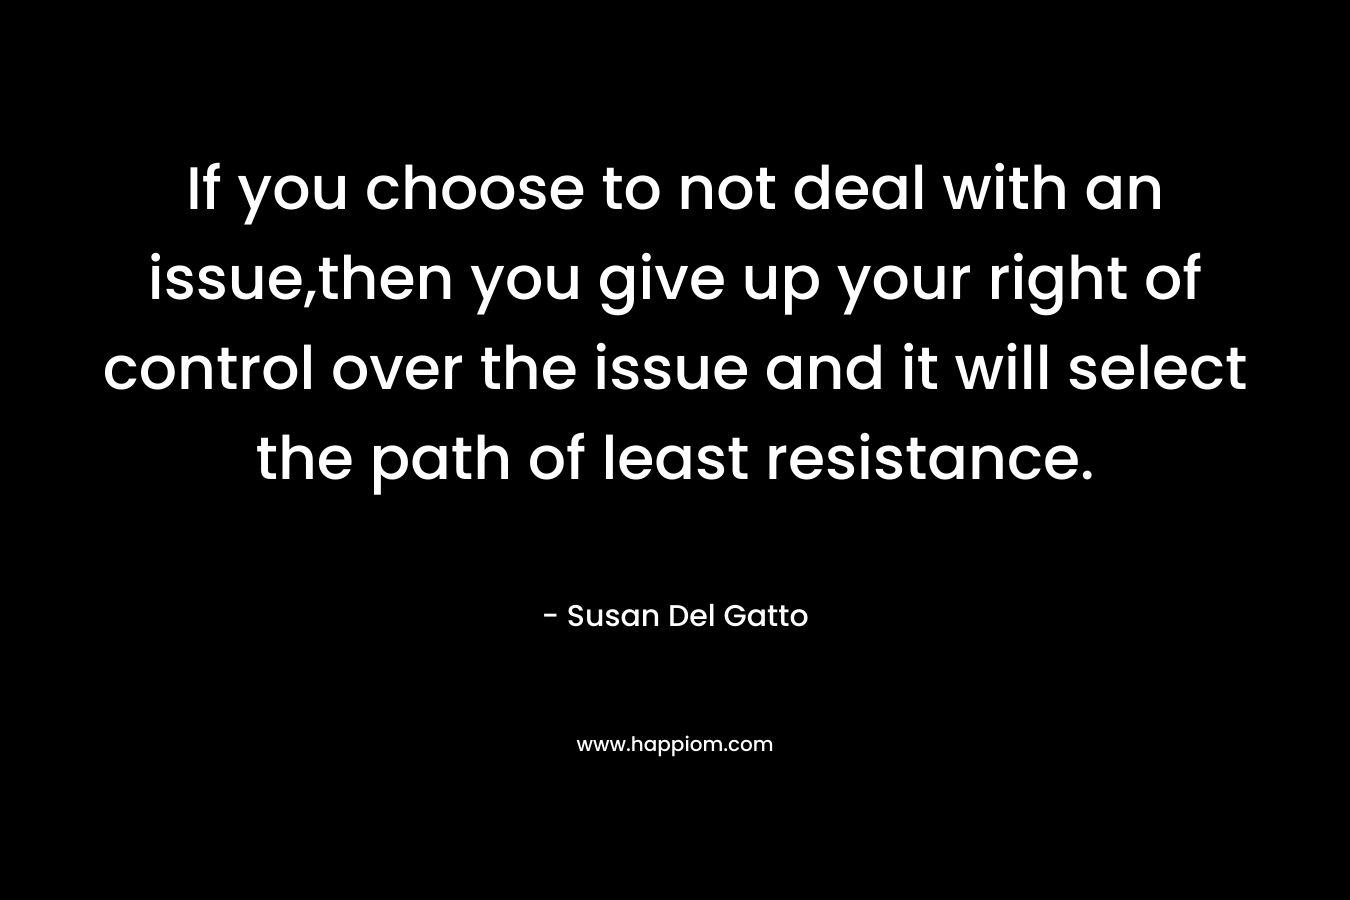 If you choose to not deal with an issue,then you give up your right of control over the issue and it will select the path of least resistance.